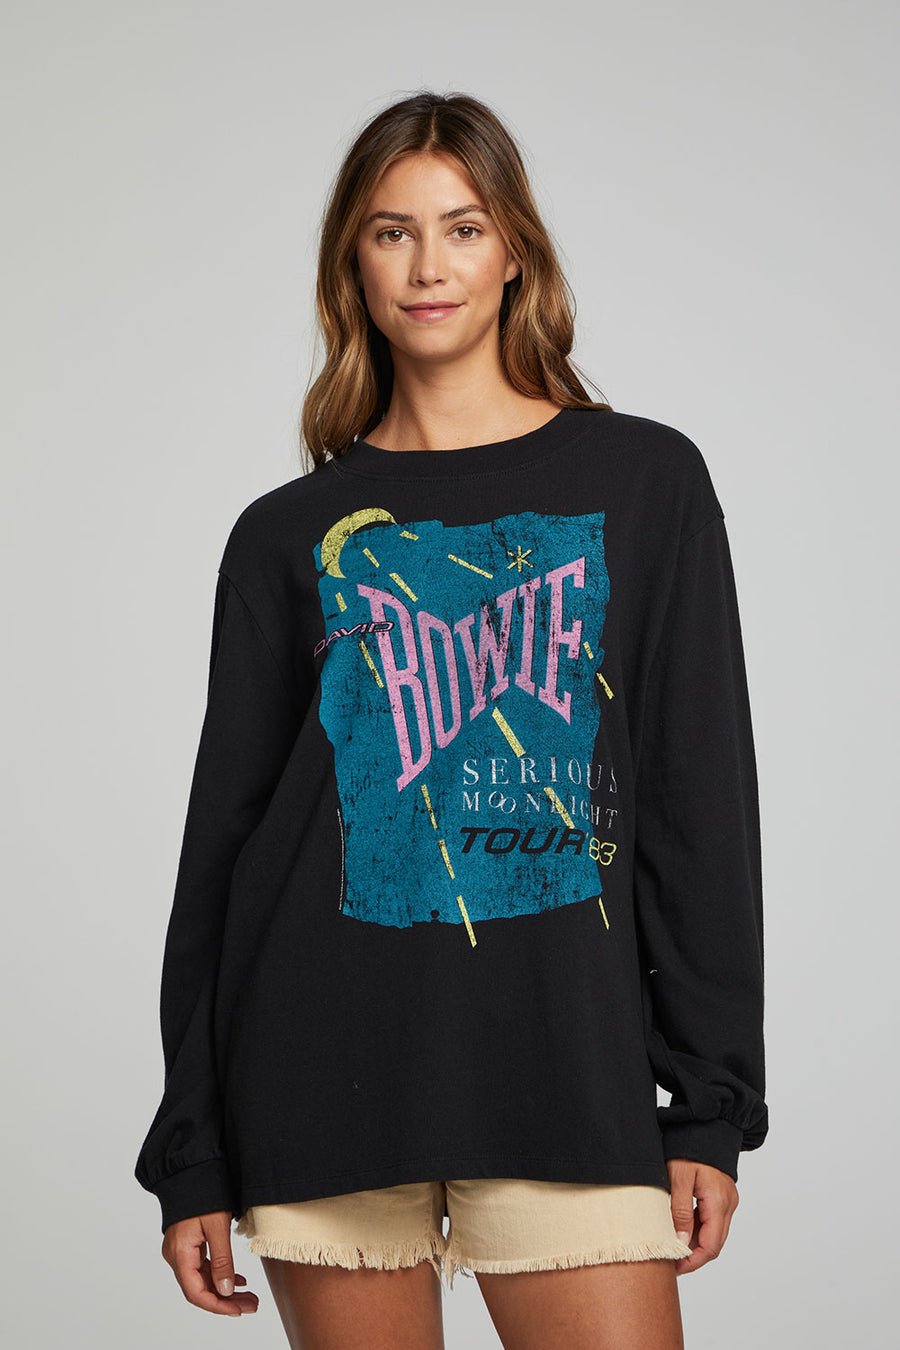 David Bowie - Serious Moonlight WOMENS chaserbrand